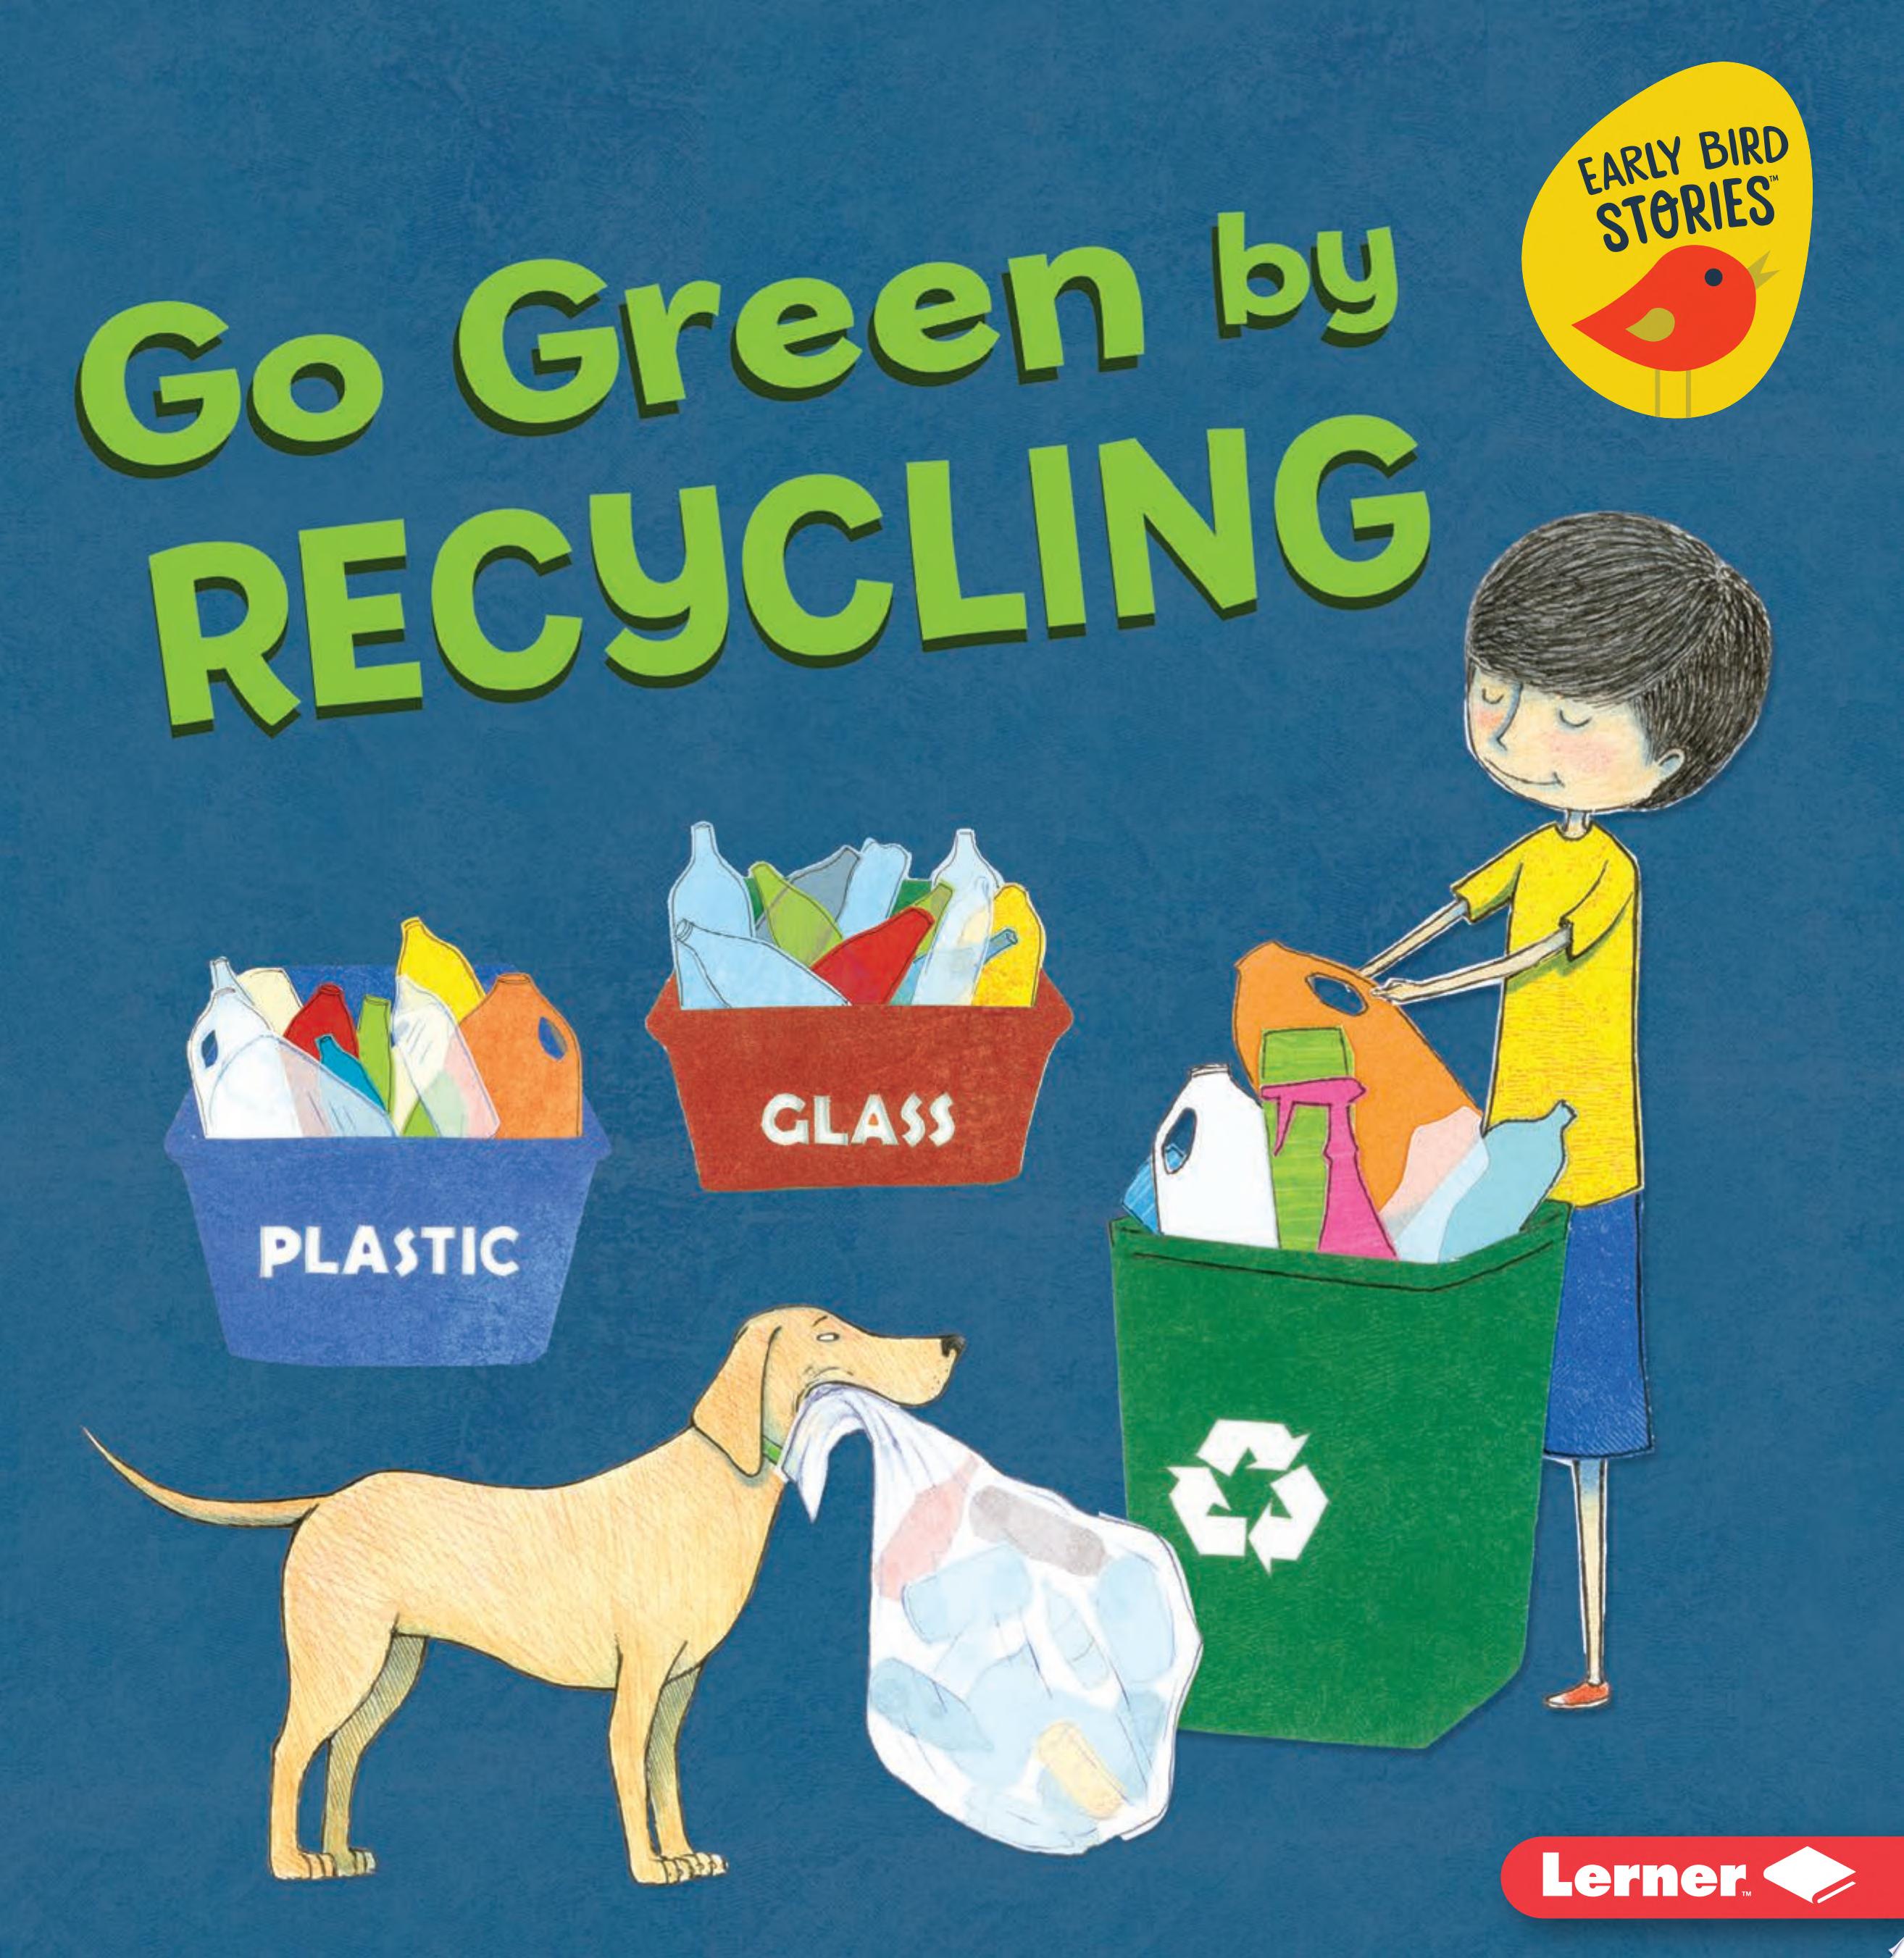 Image for "Go Green by Recycling"